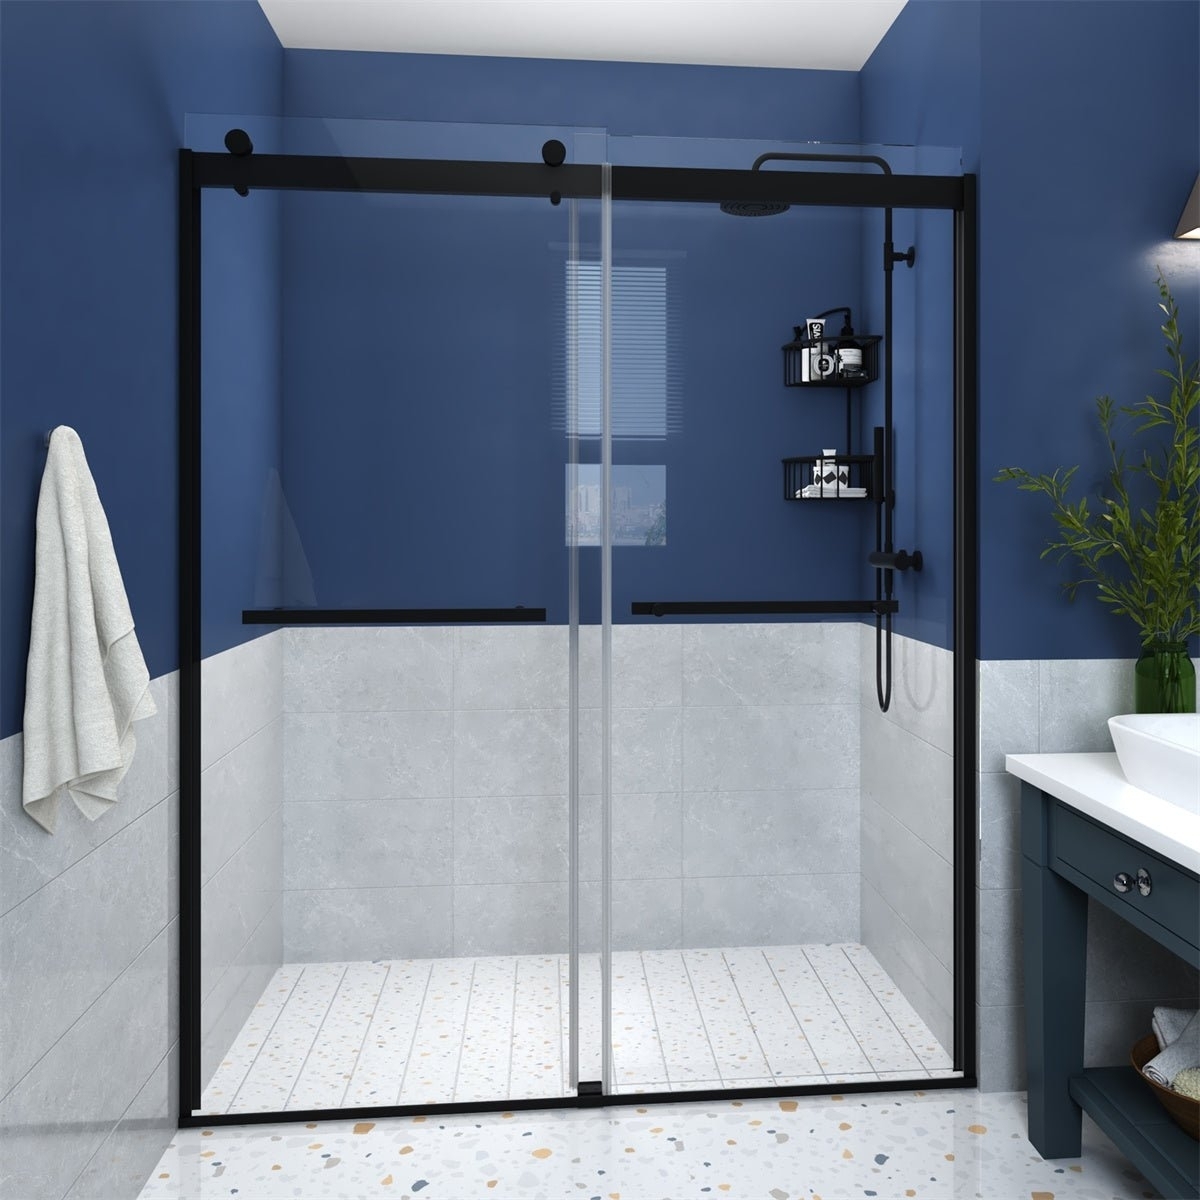 Glide 56-60 W X 74 H Matte Black Framed Sliding Glass Shower Doors With 0.3in.thick Clear Glass